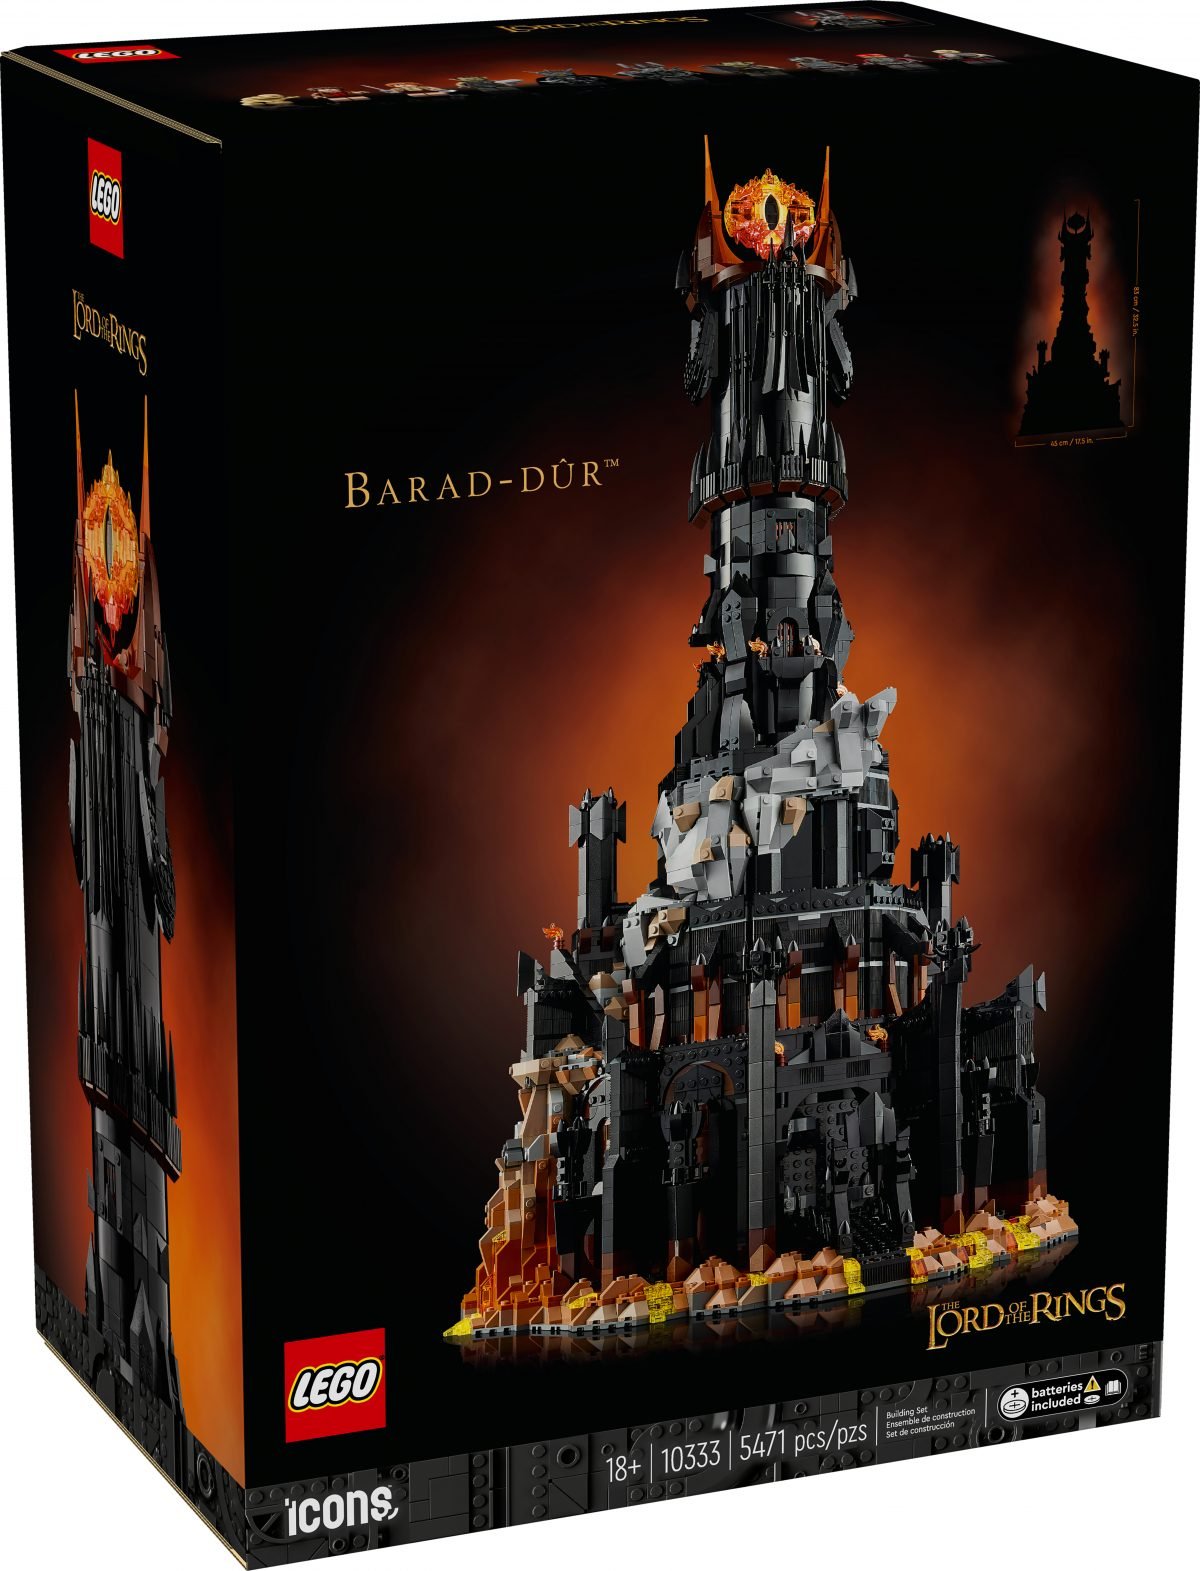 The Lord of the Rings Barad-Dûr LEGO set box